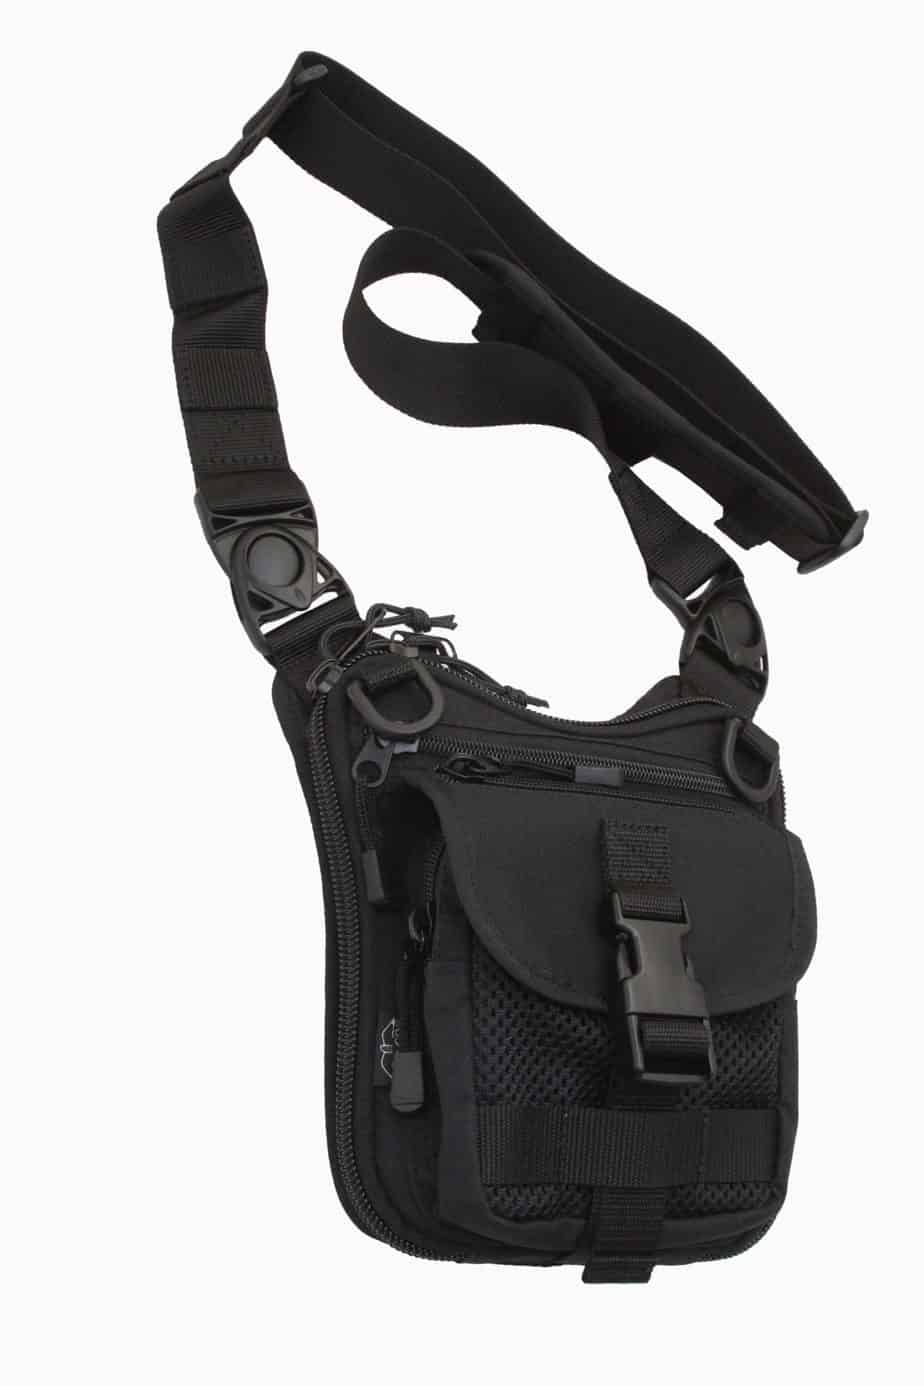 Simple CrossBody Bag for Concealed Gun Carry